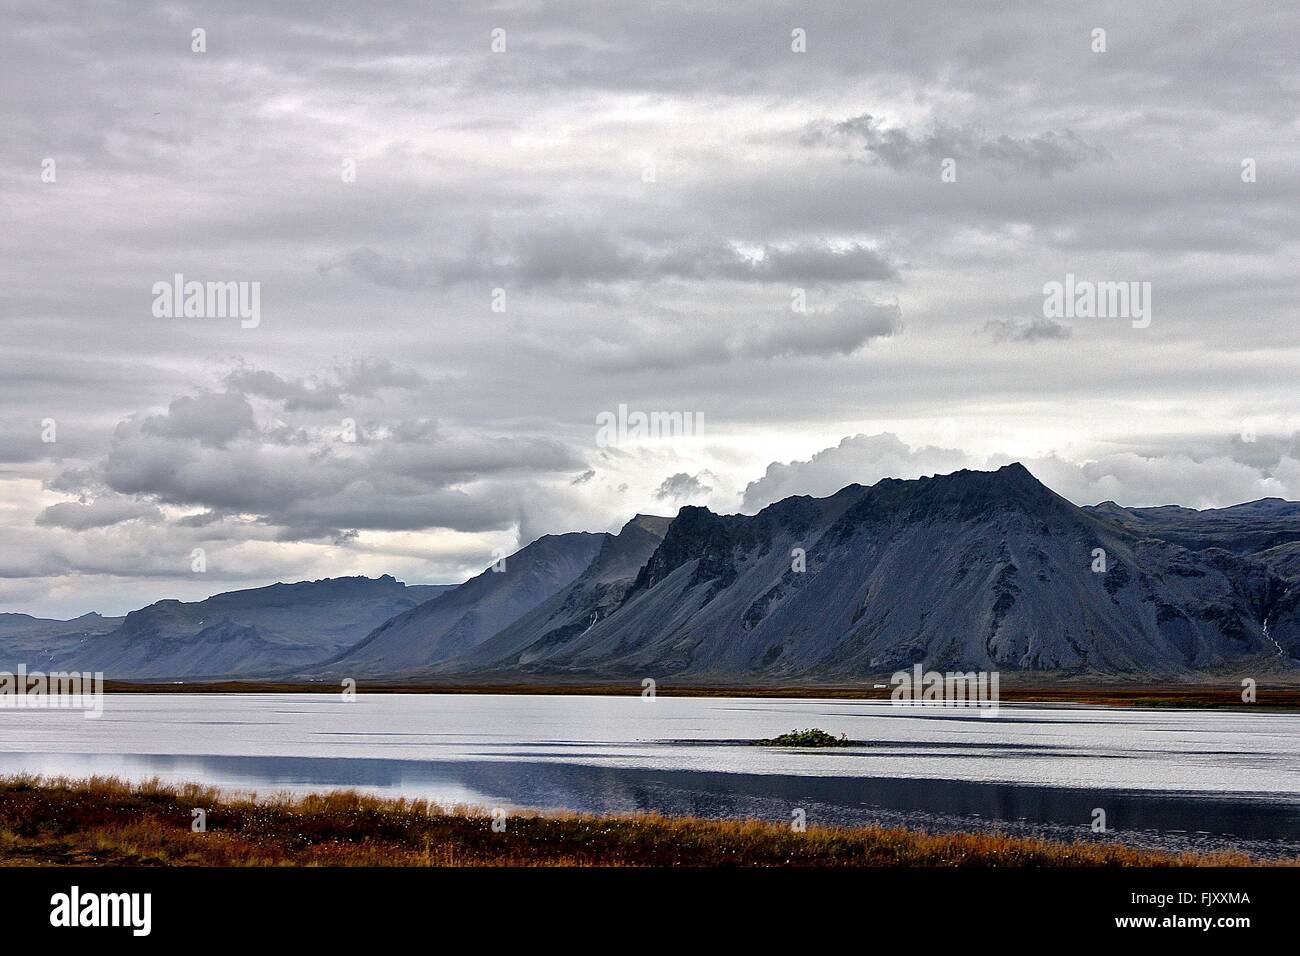 Idyllic Shot Of River And Mountains Against Cloudy Sky Stock Photo